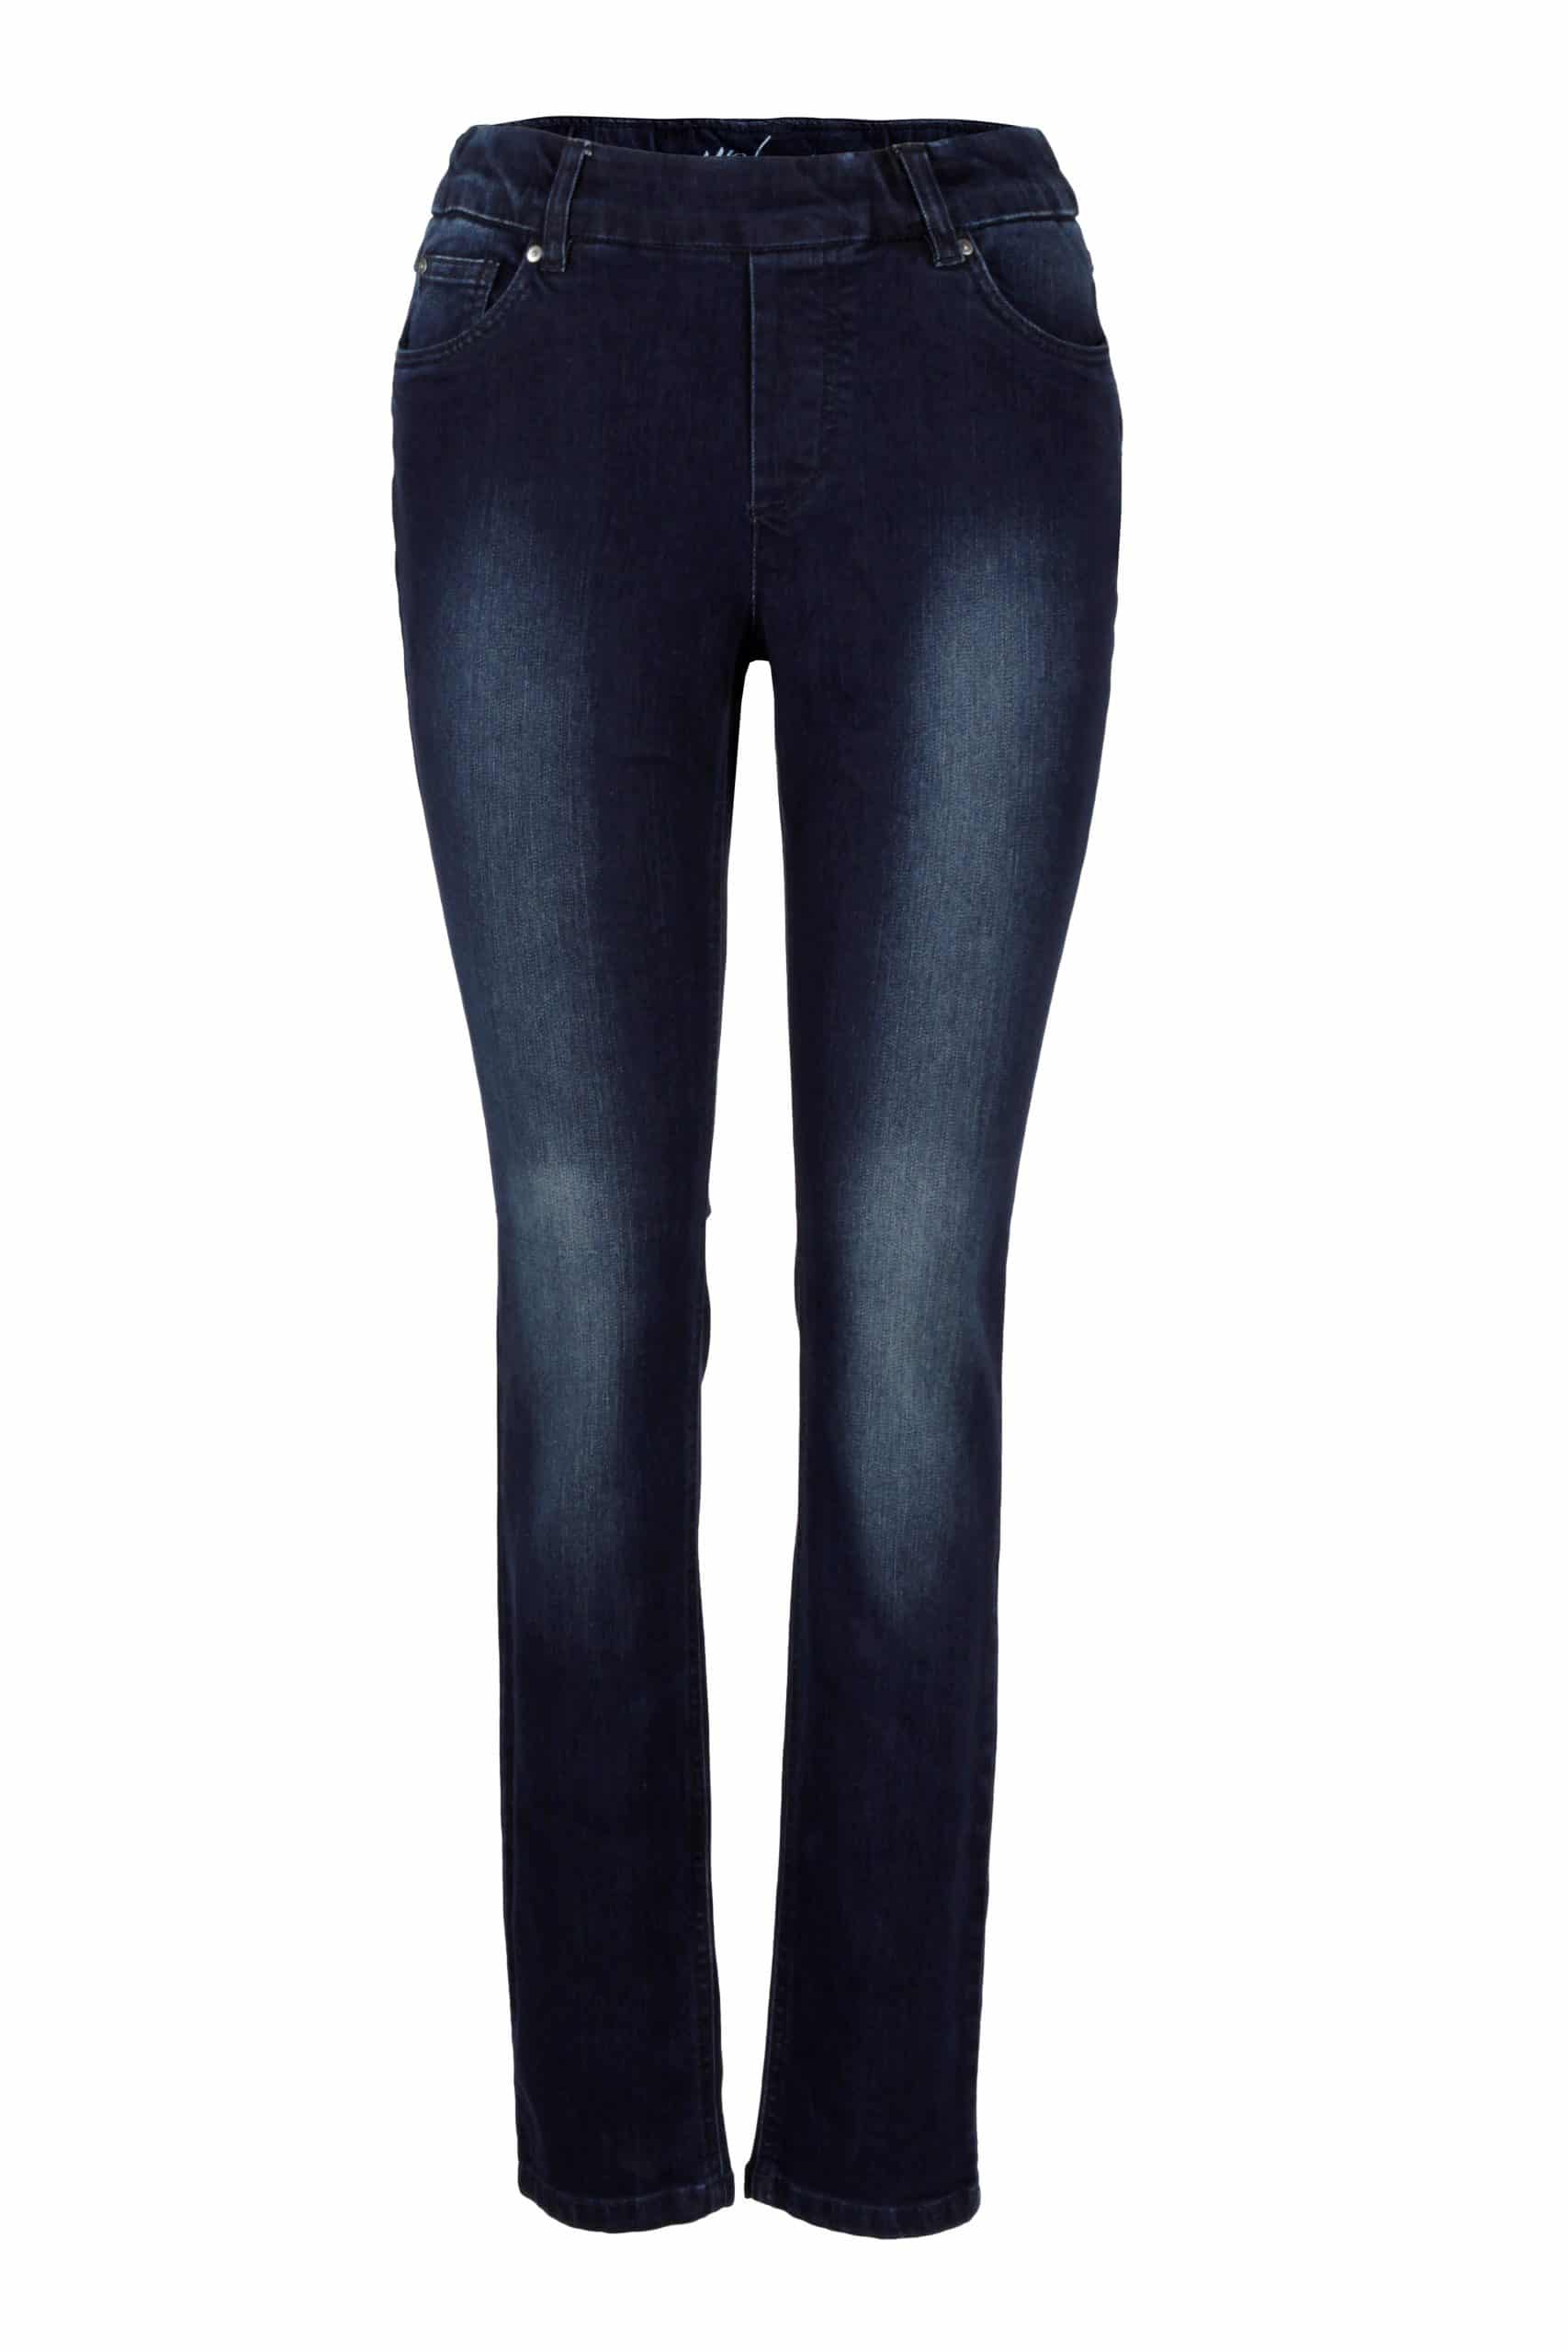 VIP Jeans Extra Stretch Comfy Skinny Jeans Colorful denim long pants 